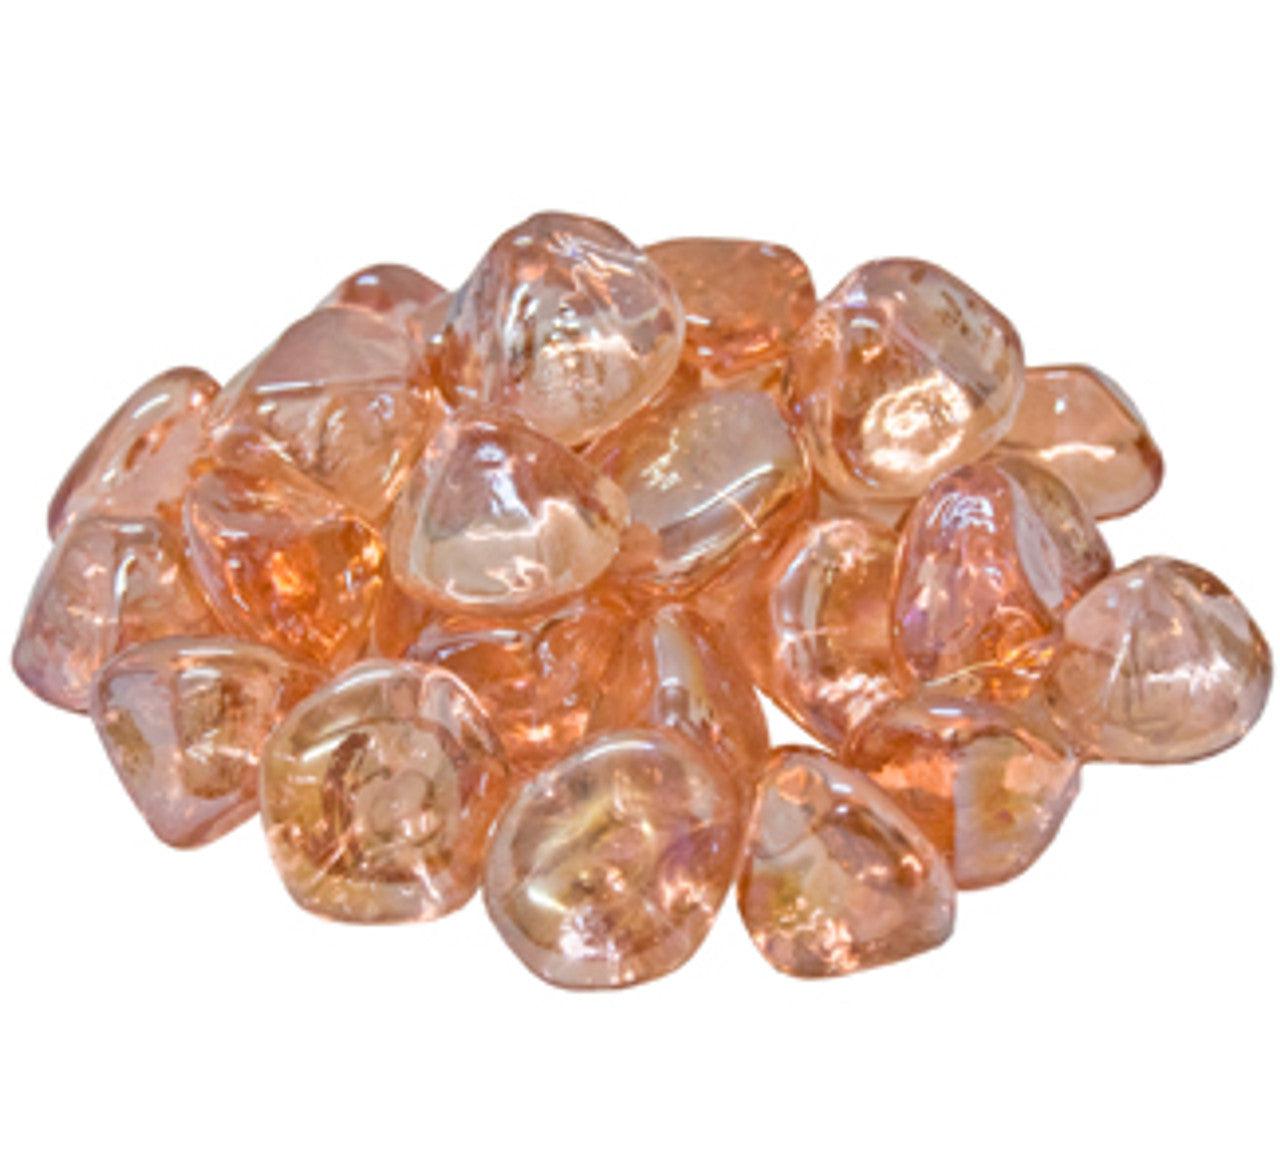 50 lb. Package of Diamond Nuggets Glass Media